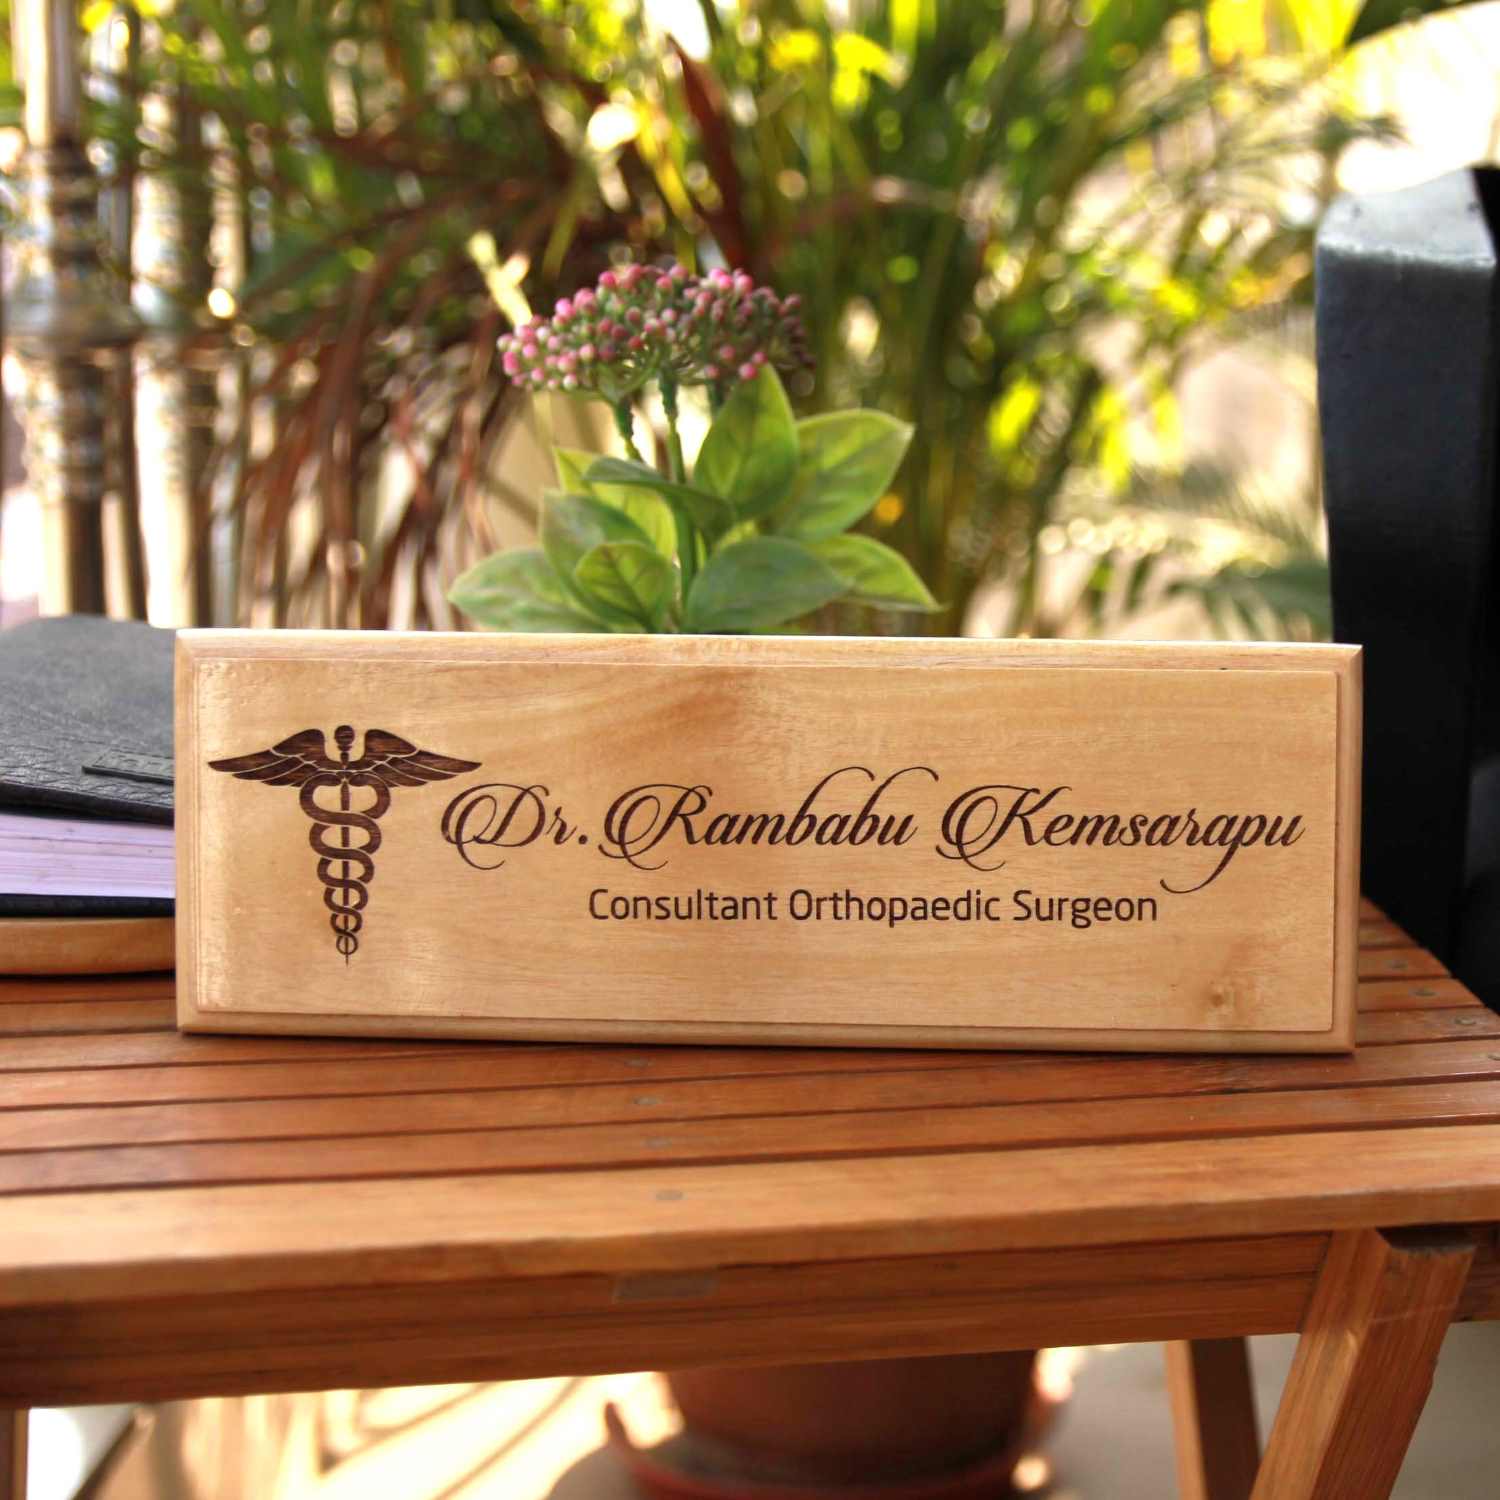 Unique Personalized Engraved Photo Plaque Gift for Doctor or Health Workers  (9x7 inches, Wood) - Incredible Gifts